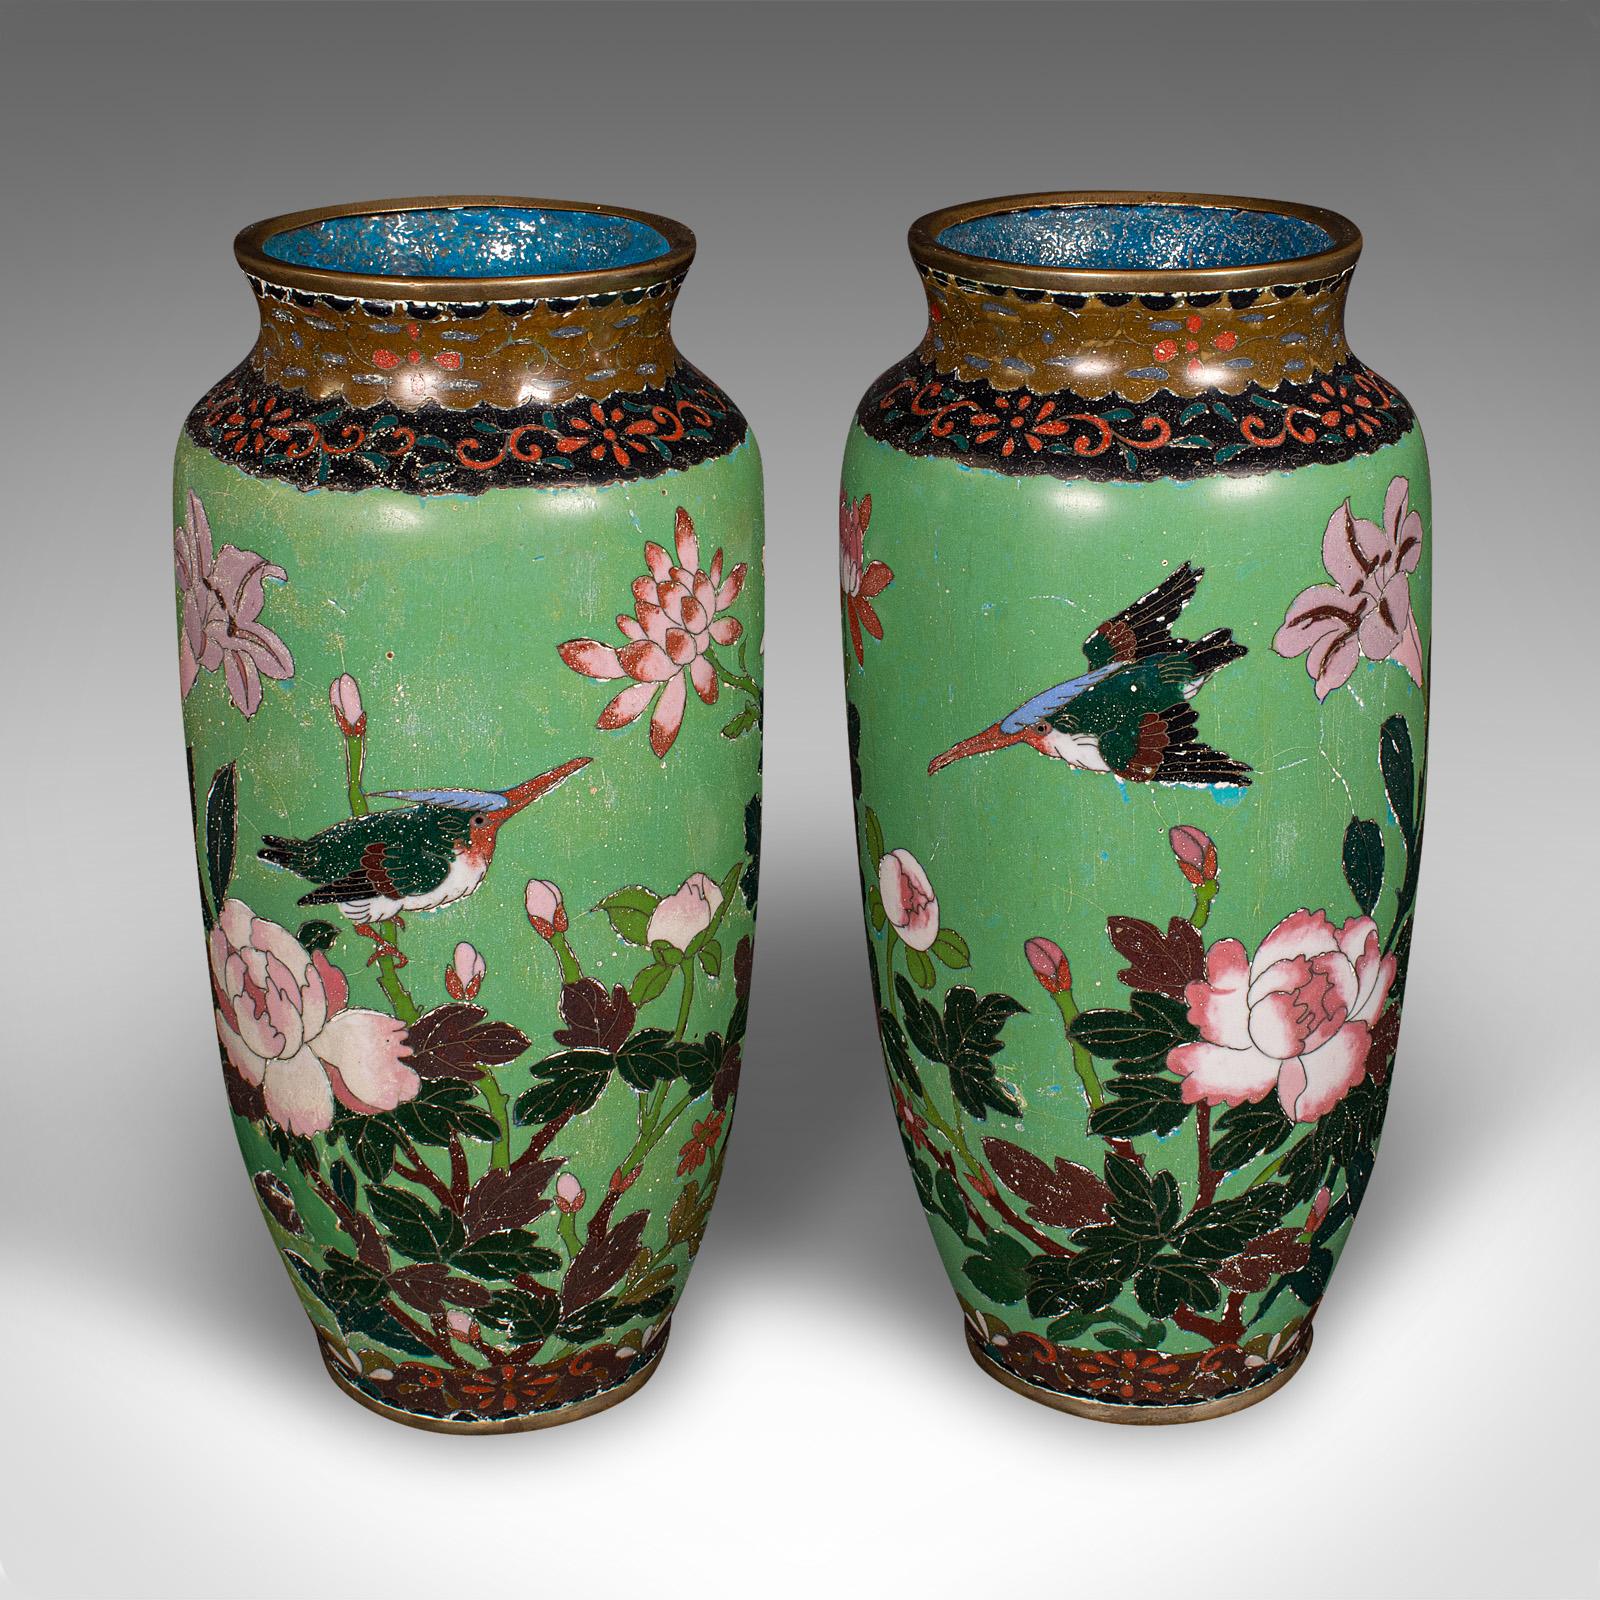 
This is a pair of antique baluster vases. A Japanese, cloisonné flower urn in Meiji taste, dating to the early Victorian period, circa 1850.

Delightfully charming vases with sweet foliate and bird motif
Displaying a desirable aged patina - one